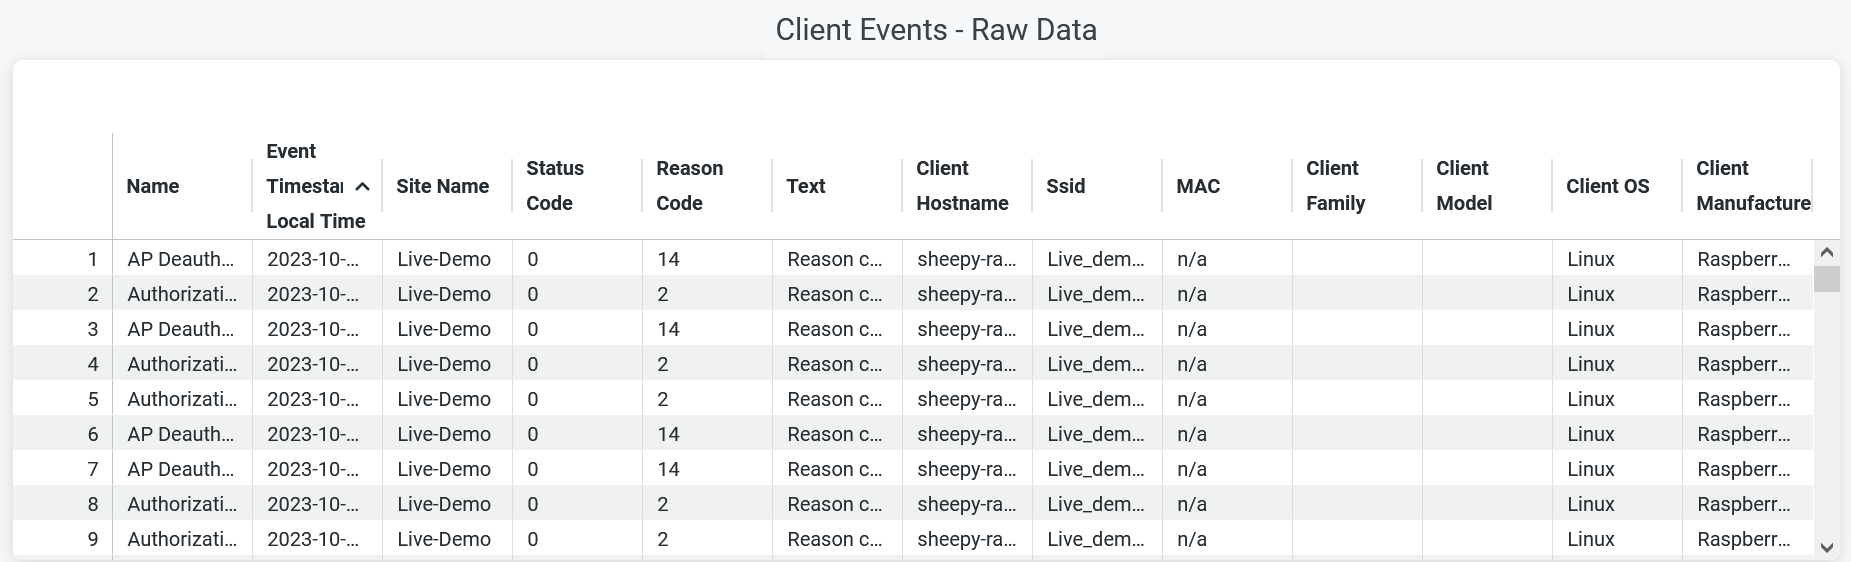 Client Events - Raw Data